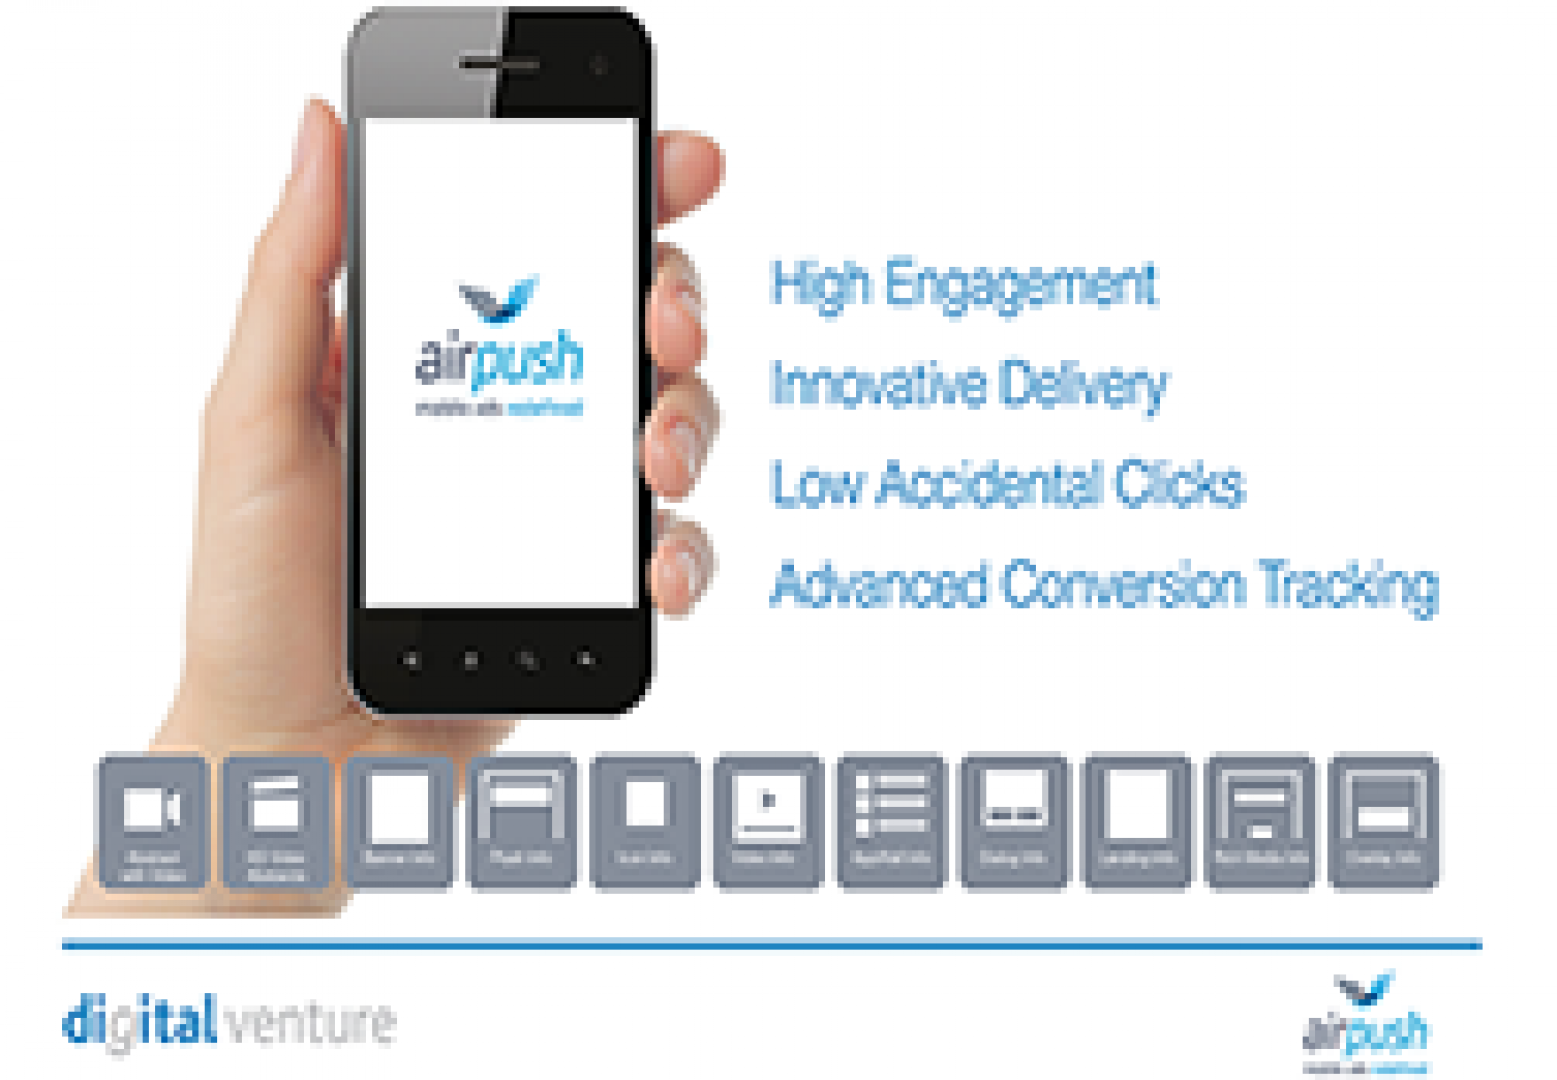 Digital Venture becomes the exclusive provider of Airpush in Middle East& Africa.